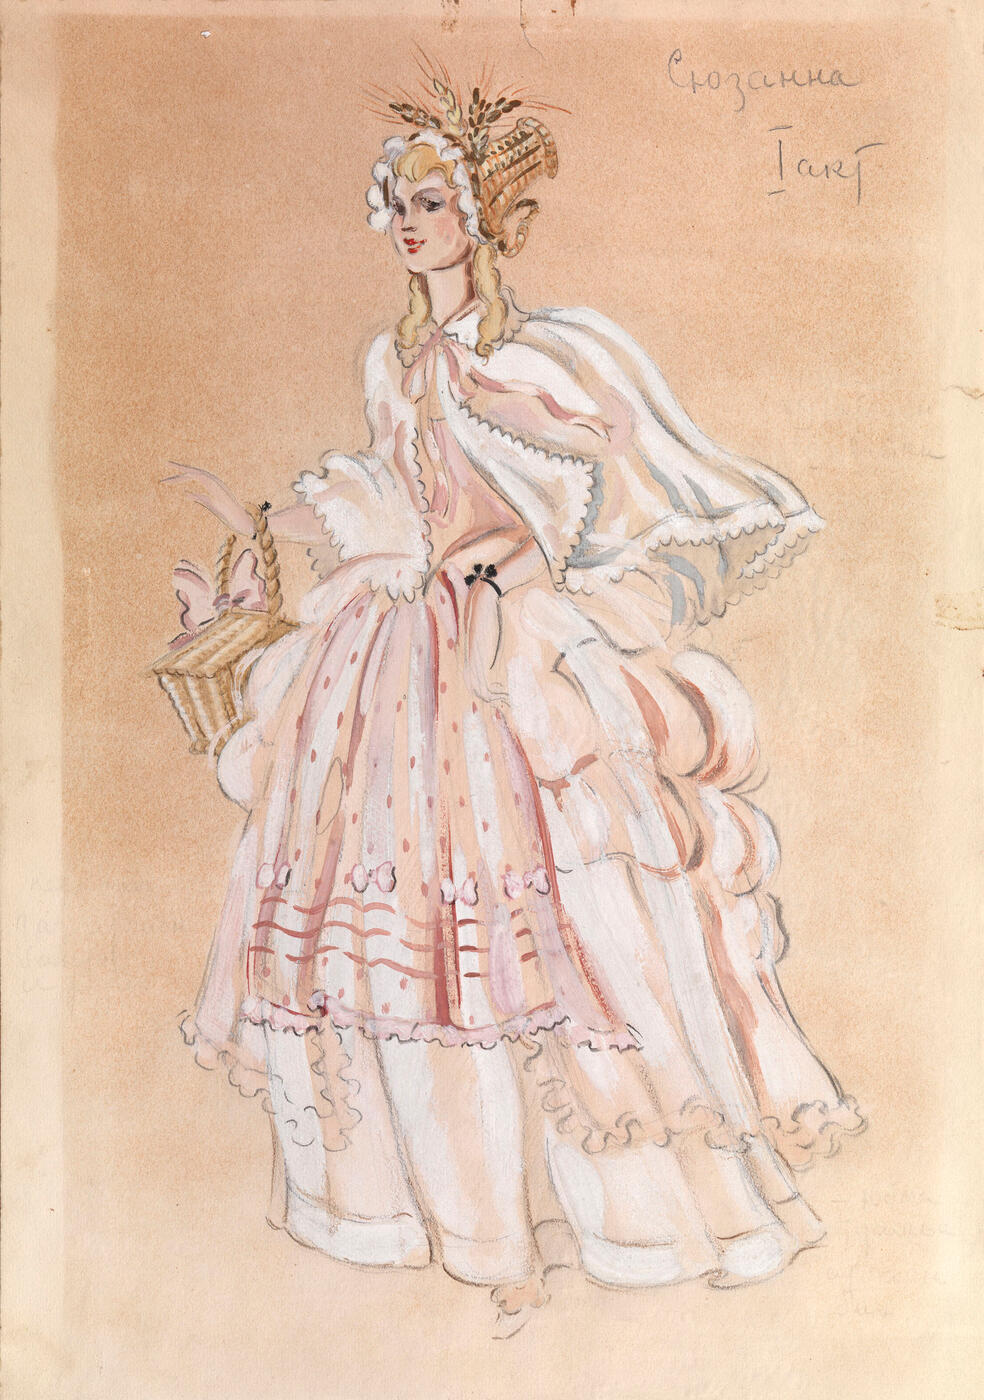 Costume Design for Susanna, for the First Act of W.A. Mozart's "Le nozze di Figaro"